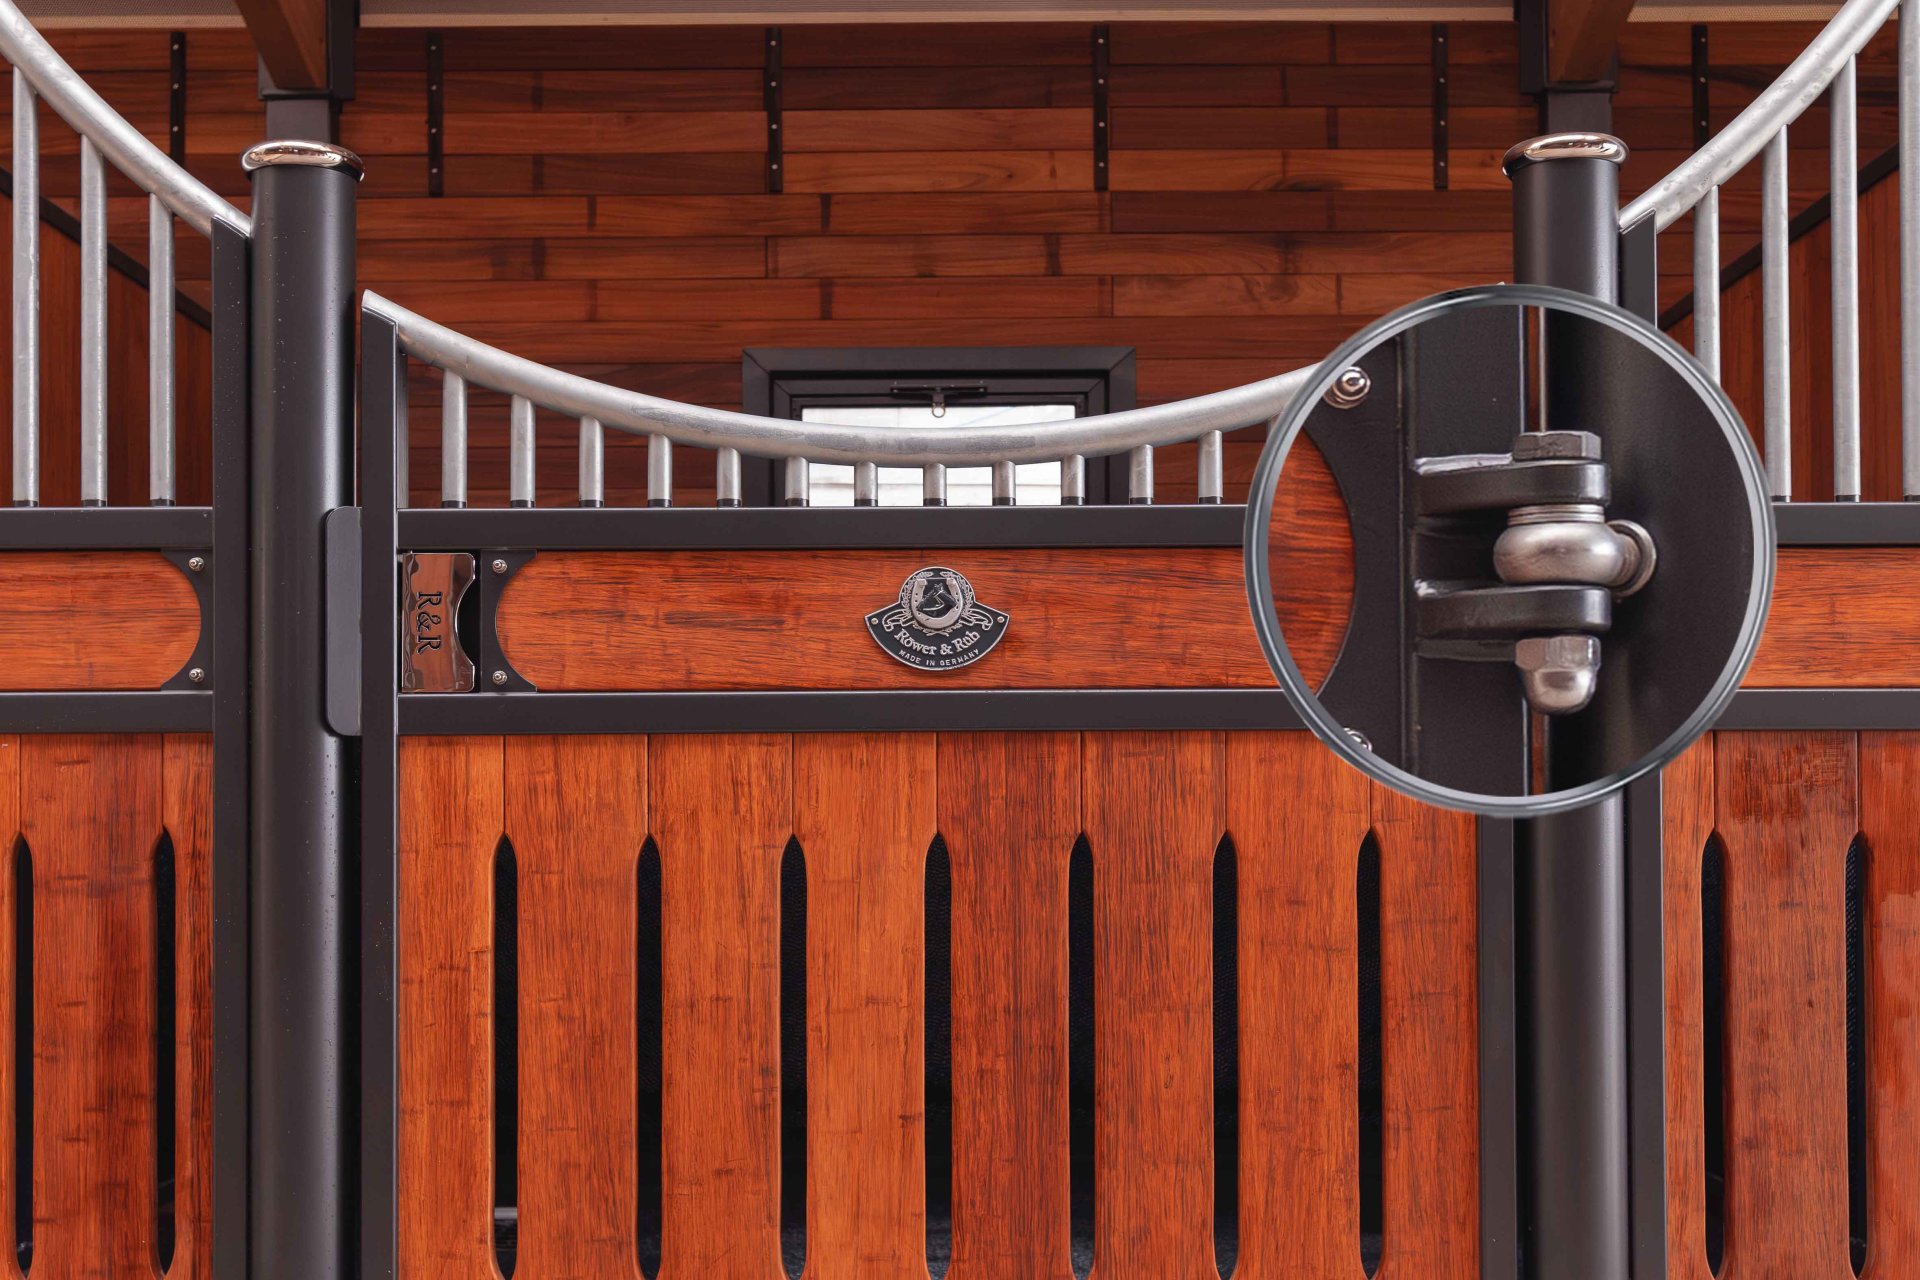 Secure horse stall door with solid and rounded pivot point